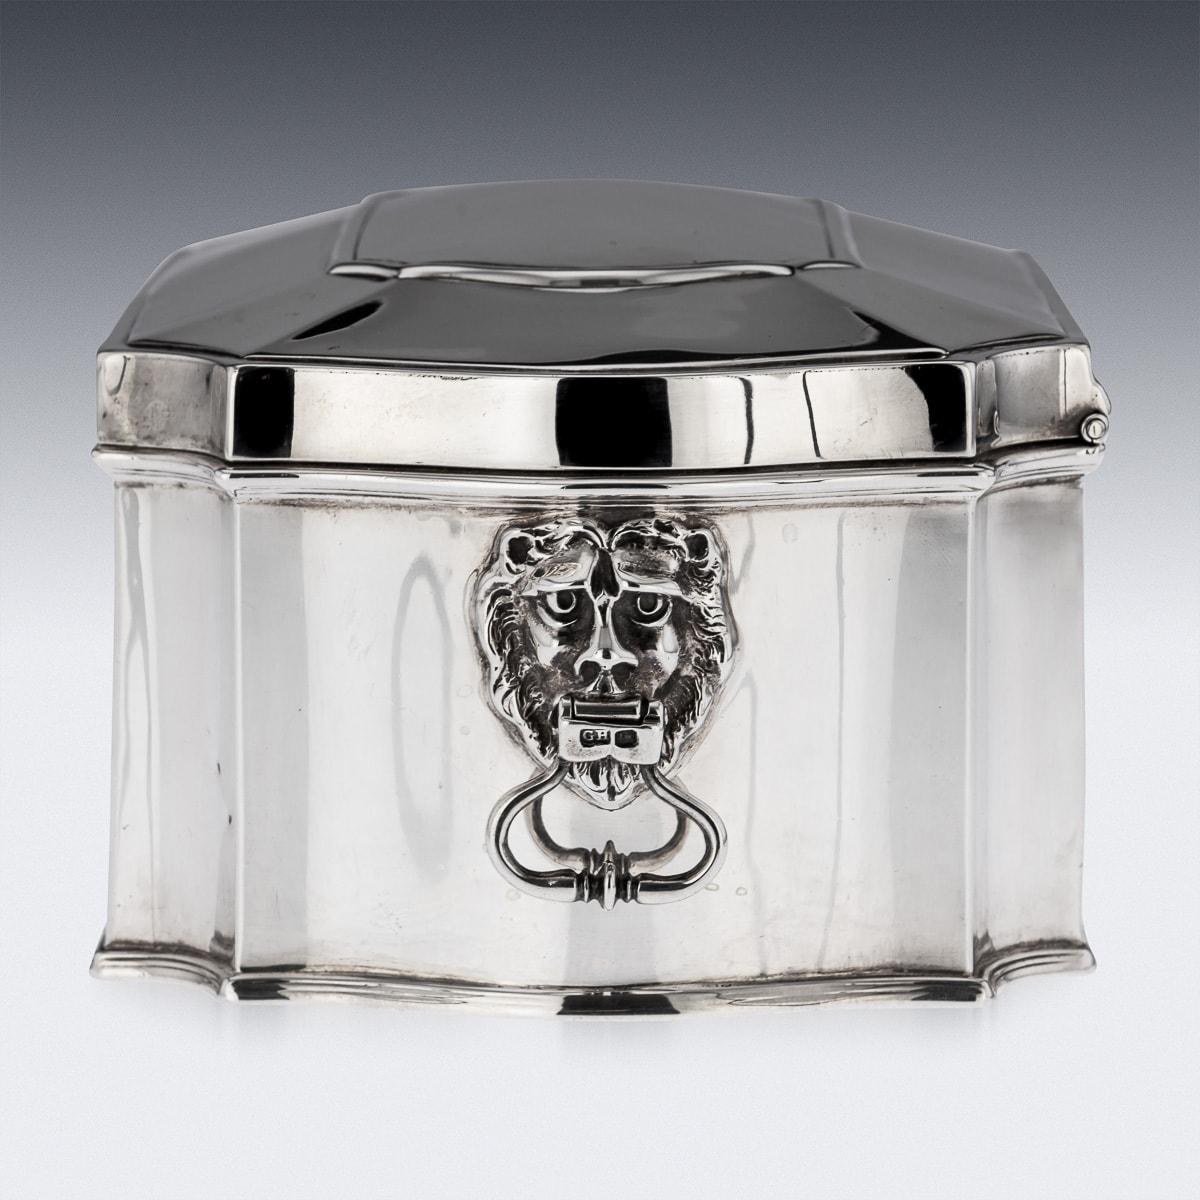 British 20th Century English Solid Silver Casket, Sheffield, c.1915 For Sale